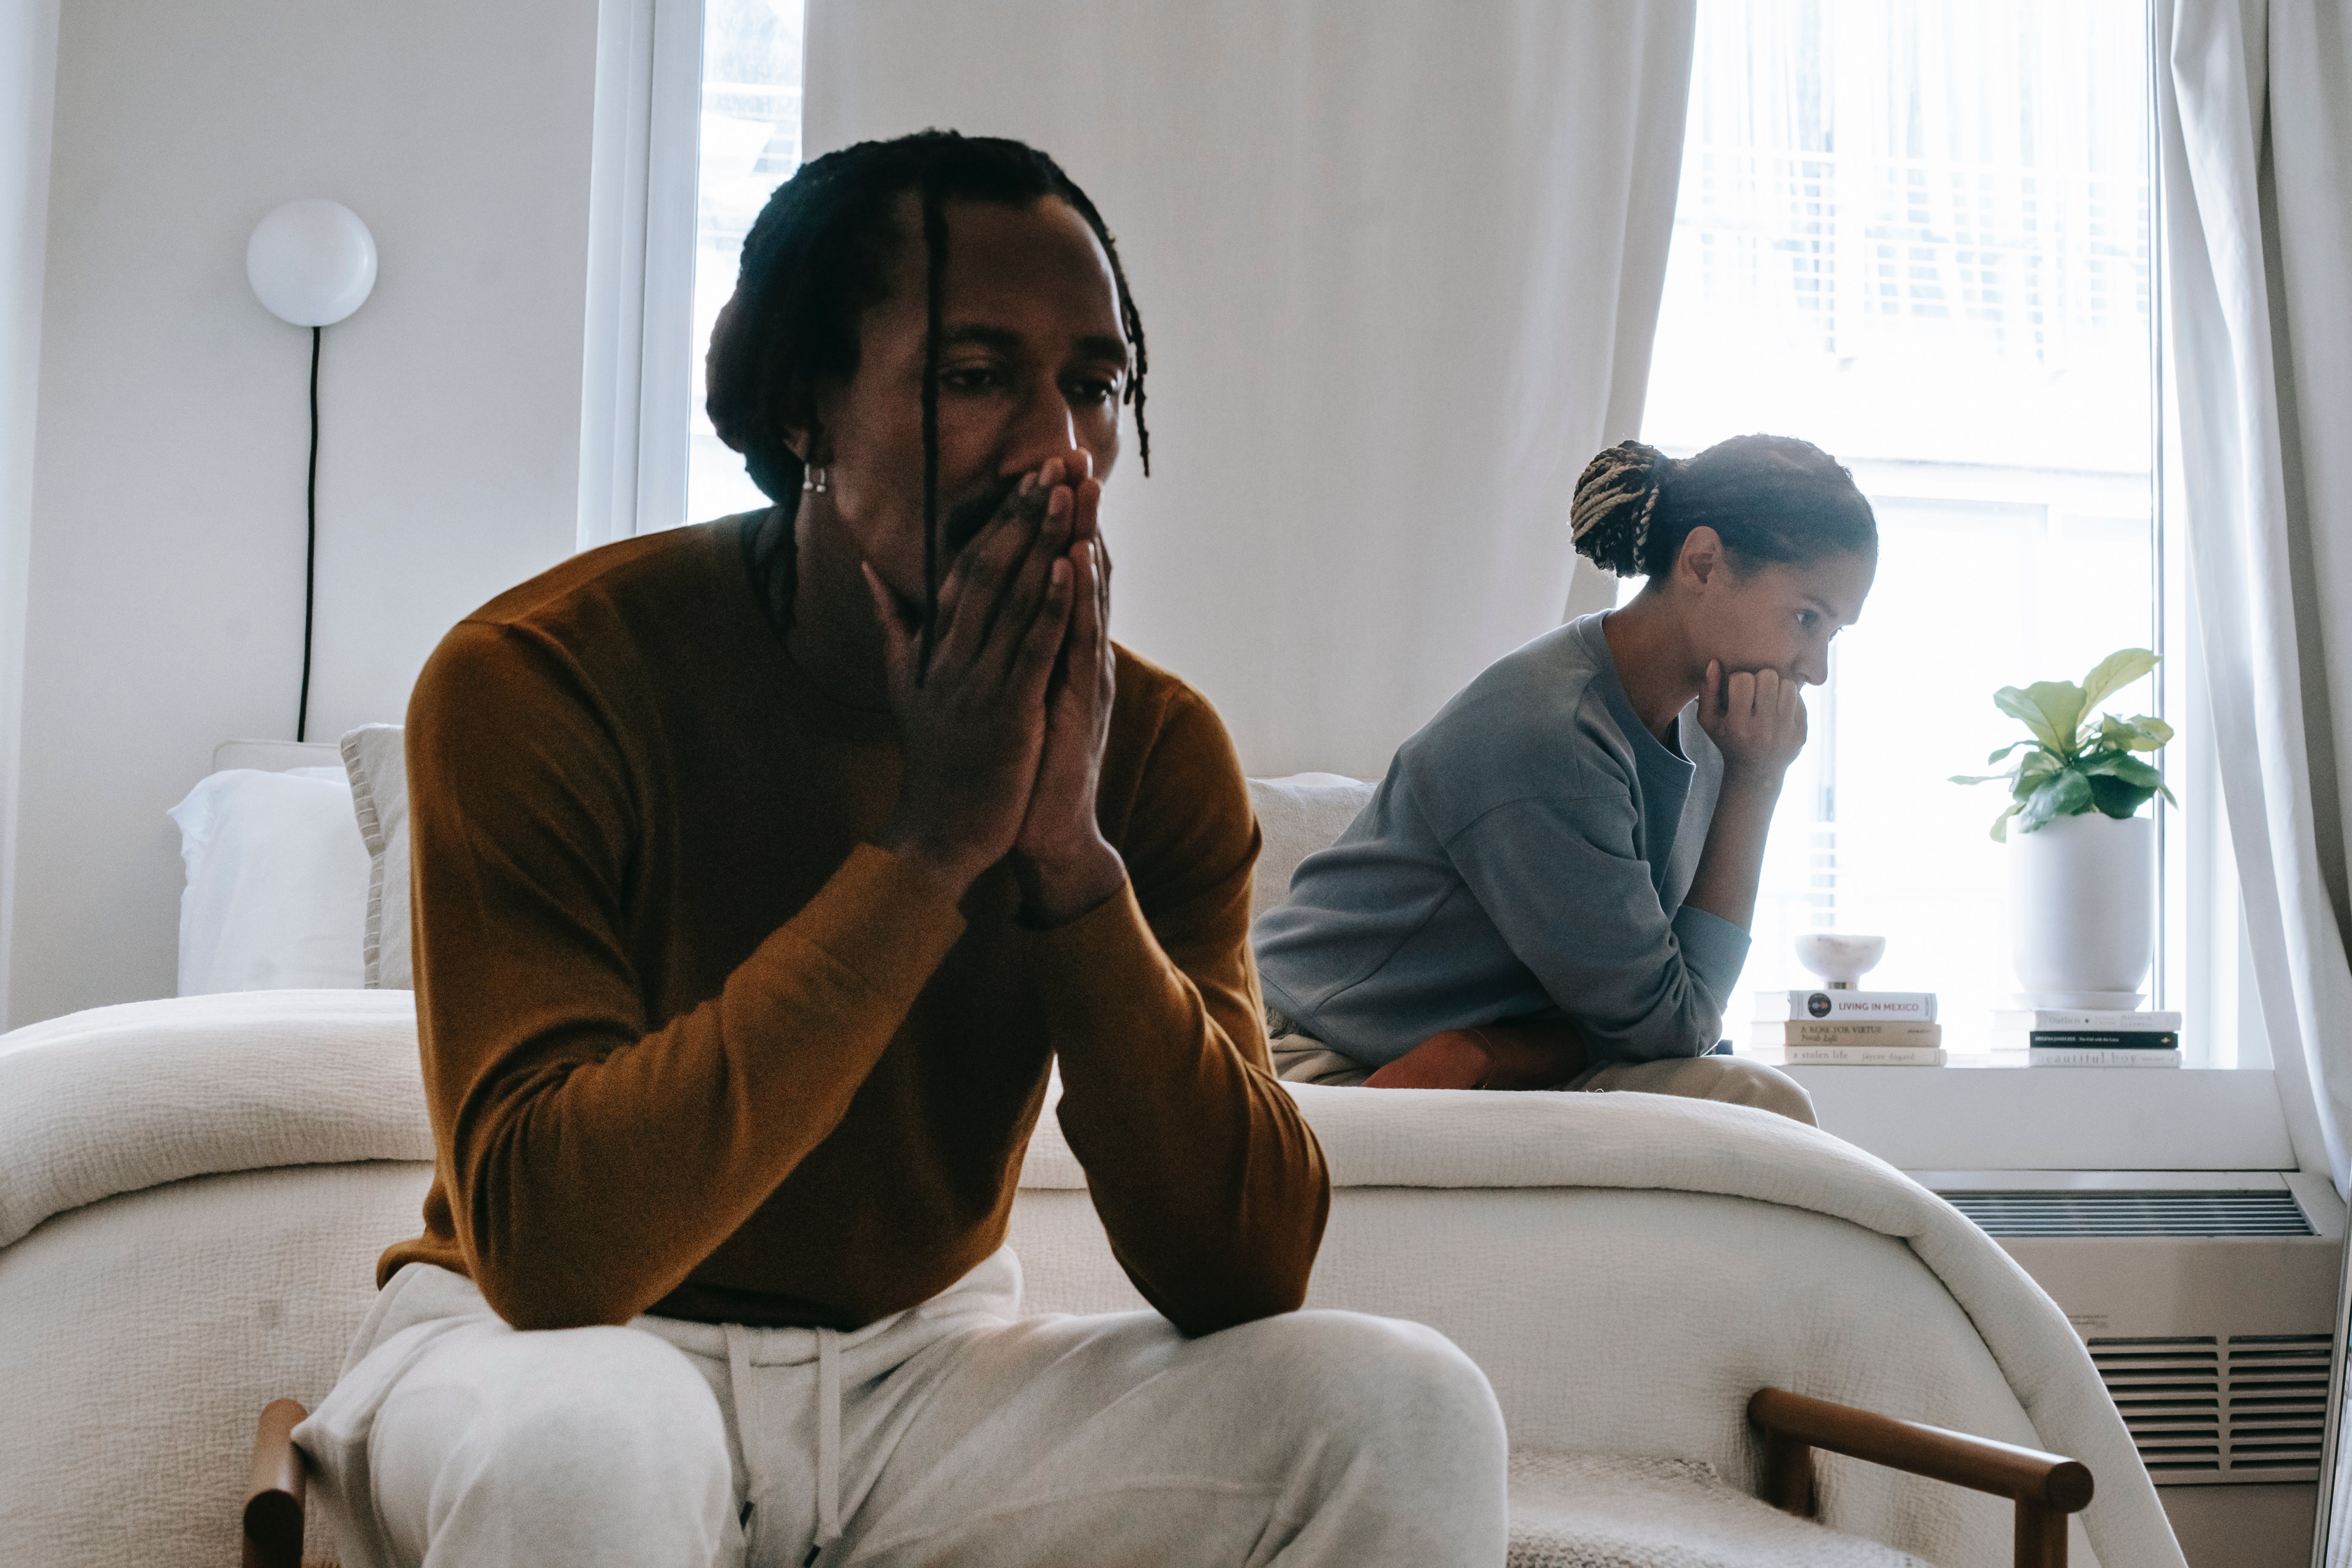 An upset couple sitting far away from each other on a bed | Source: Pexels